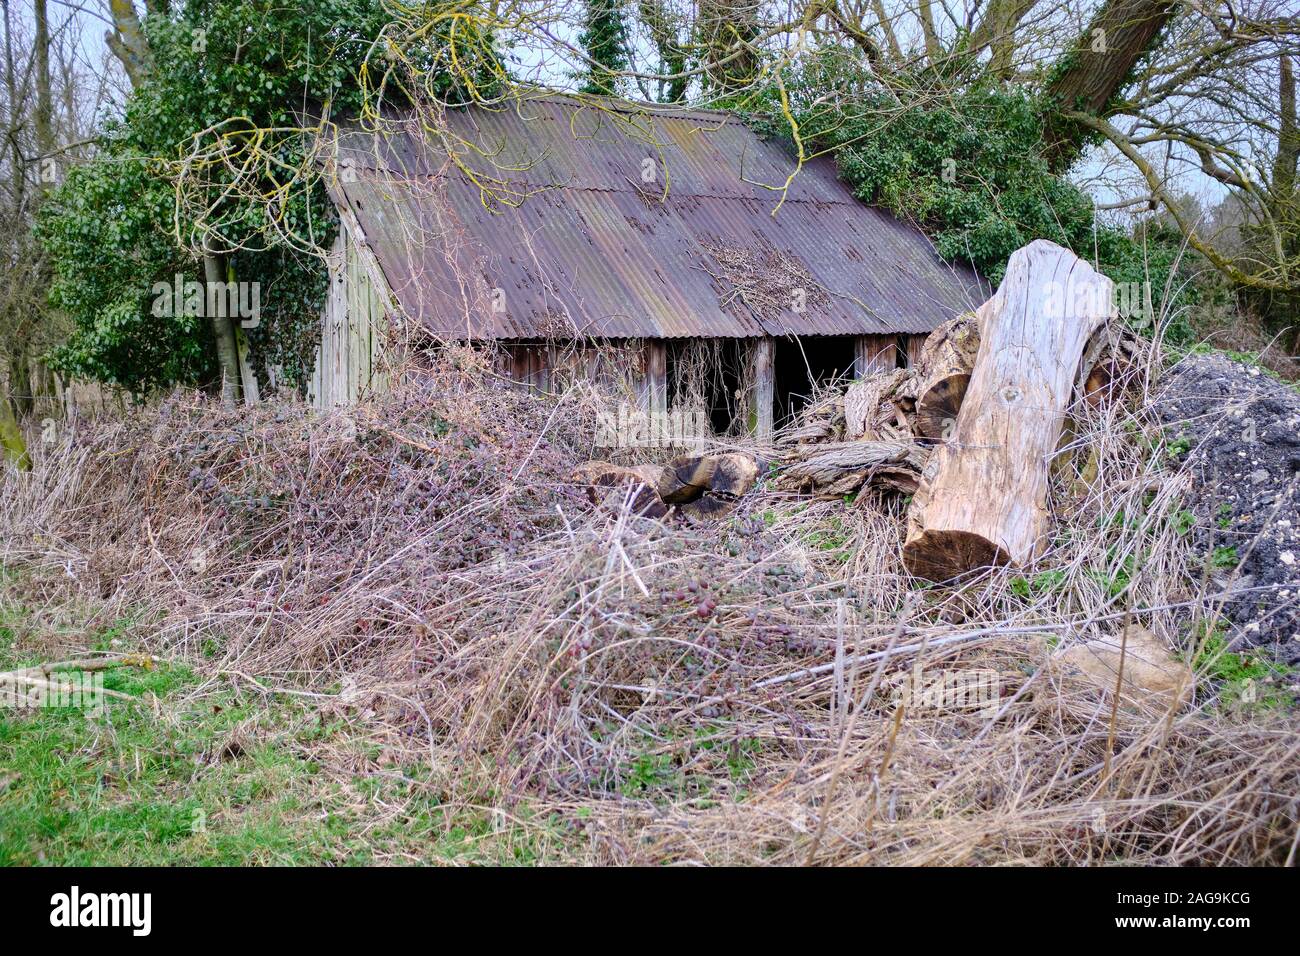 An barn that has been made from metal sheets that has not been used for a long time and has allowed to fall into a state of disrepair Stock Photo